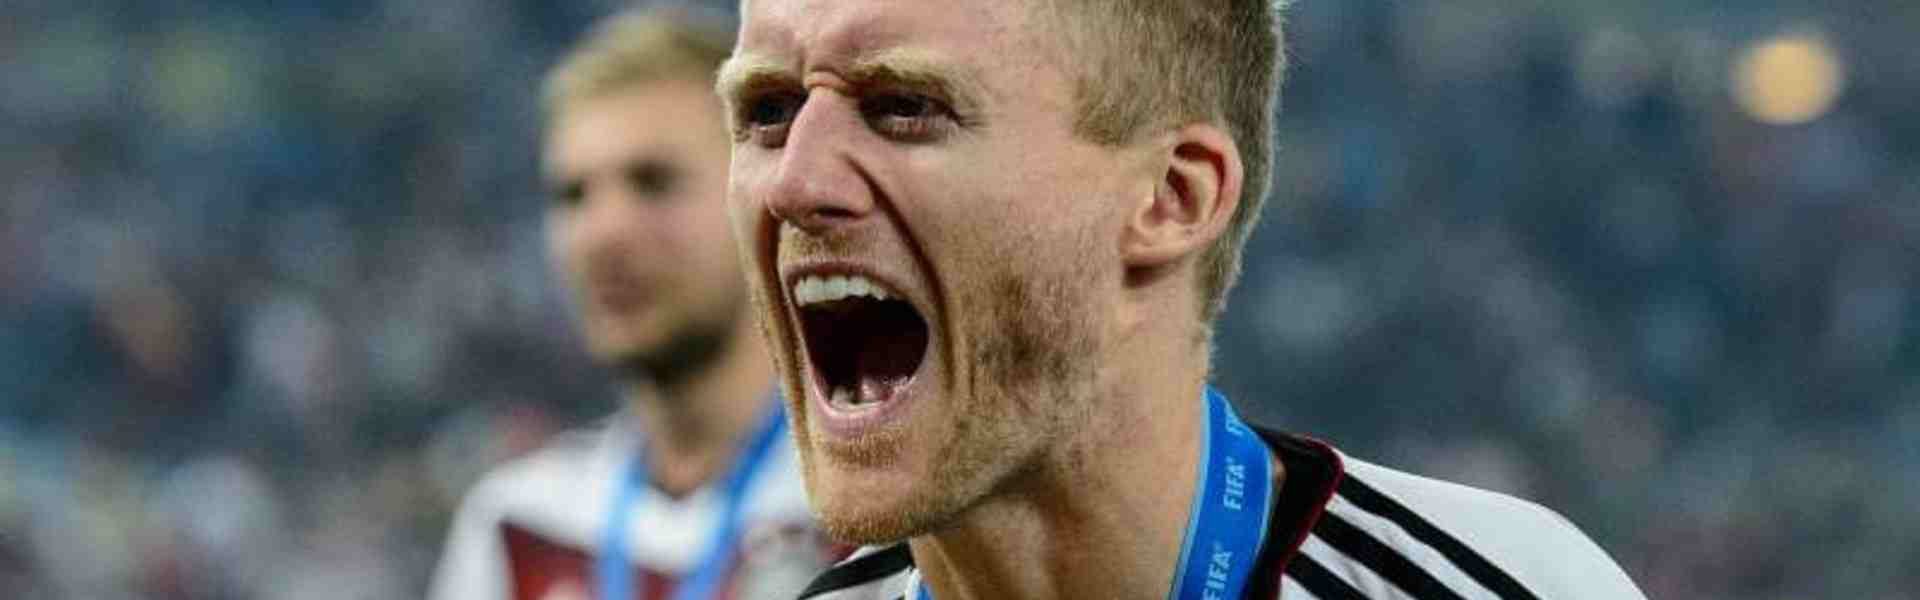 Andre Schurrle played a key role in Germany winning the 2014 edition of the World Cup. (Image Credit: Twitter)